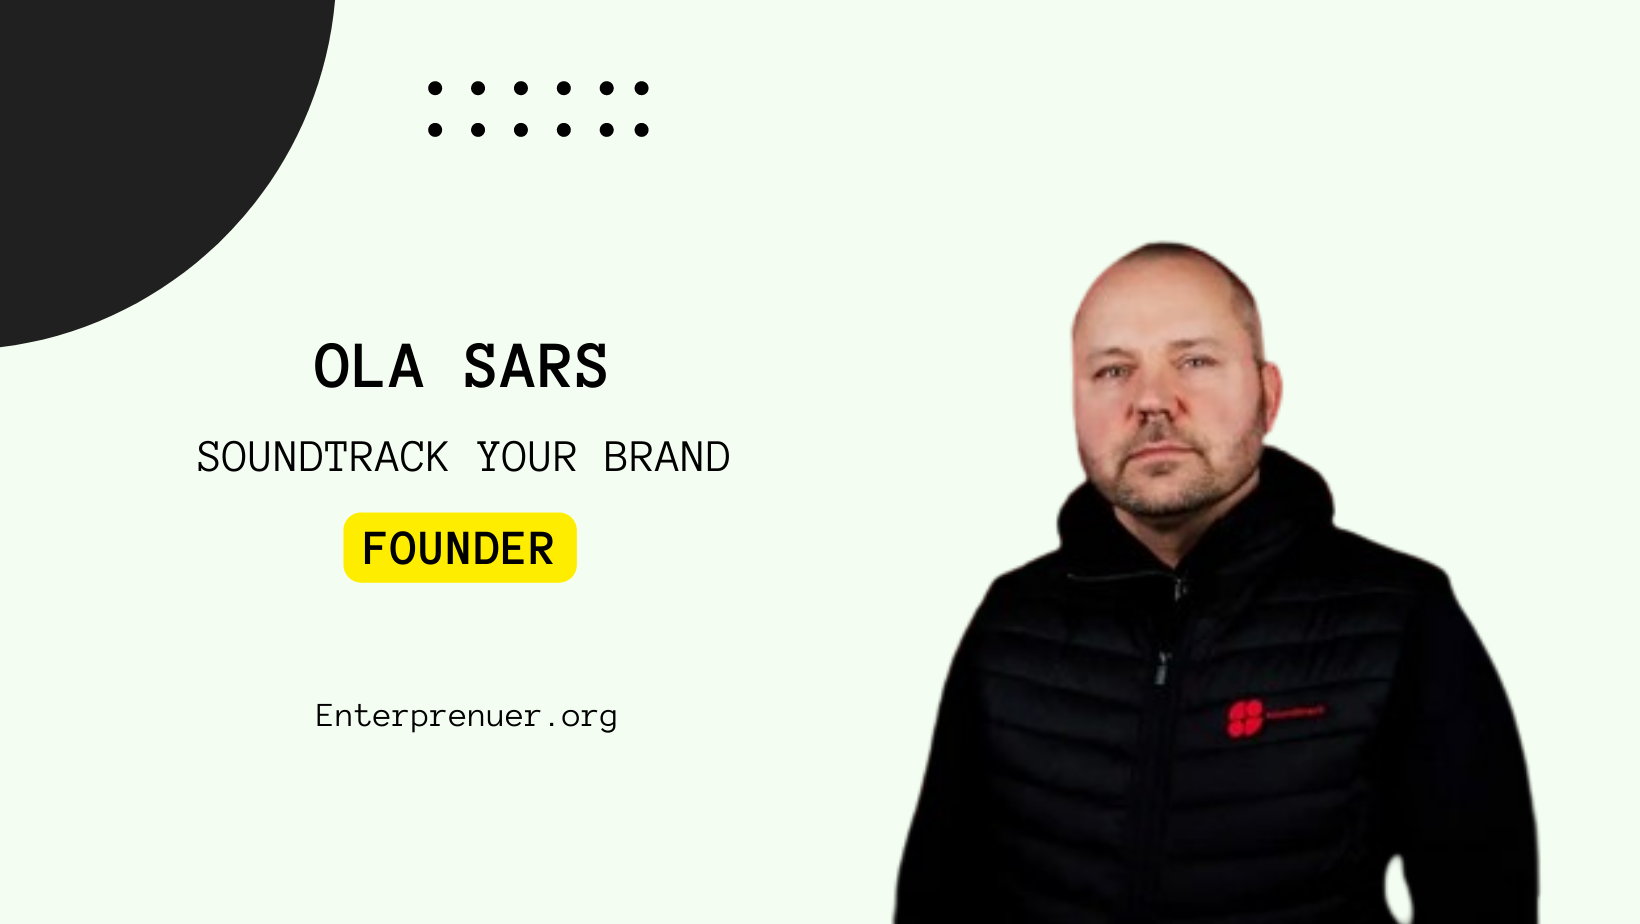 Ola Sars Founder of Soundtrack Your Brand